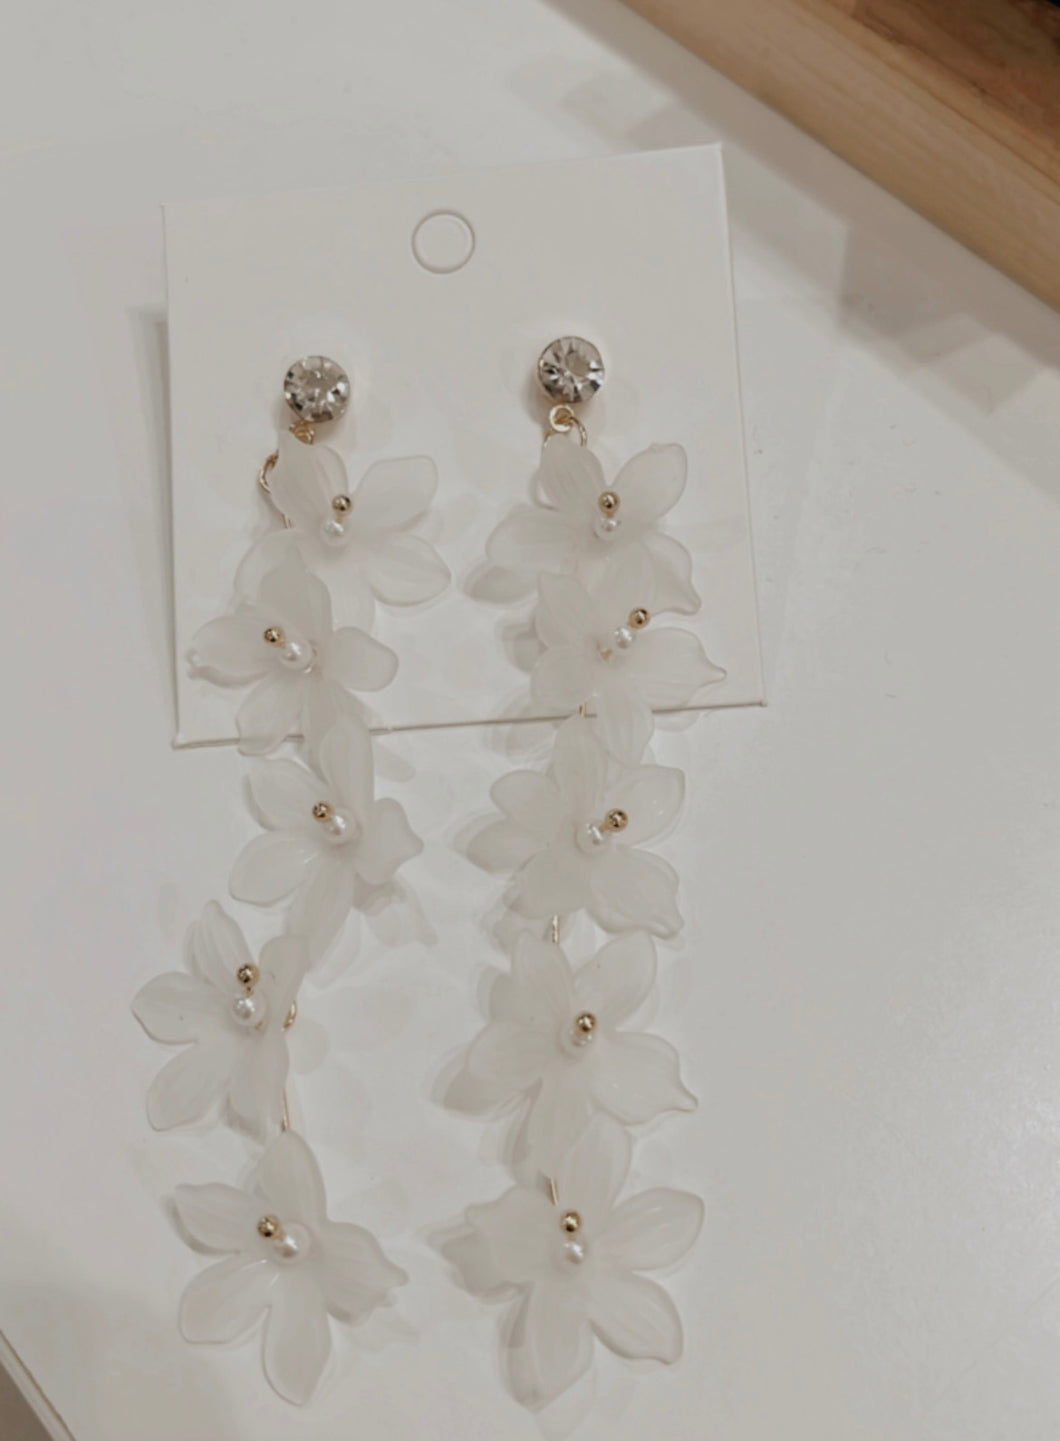 The “Flora” Earring